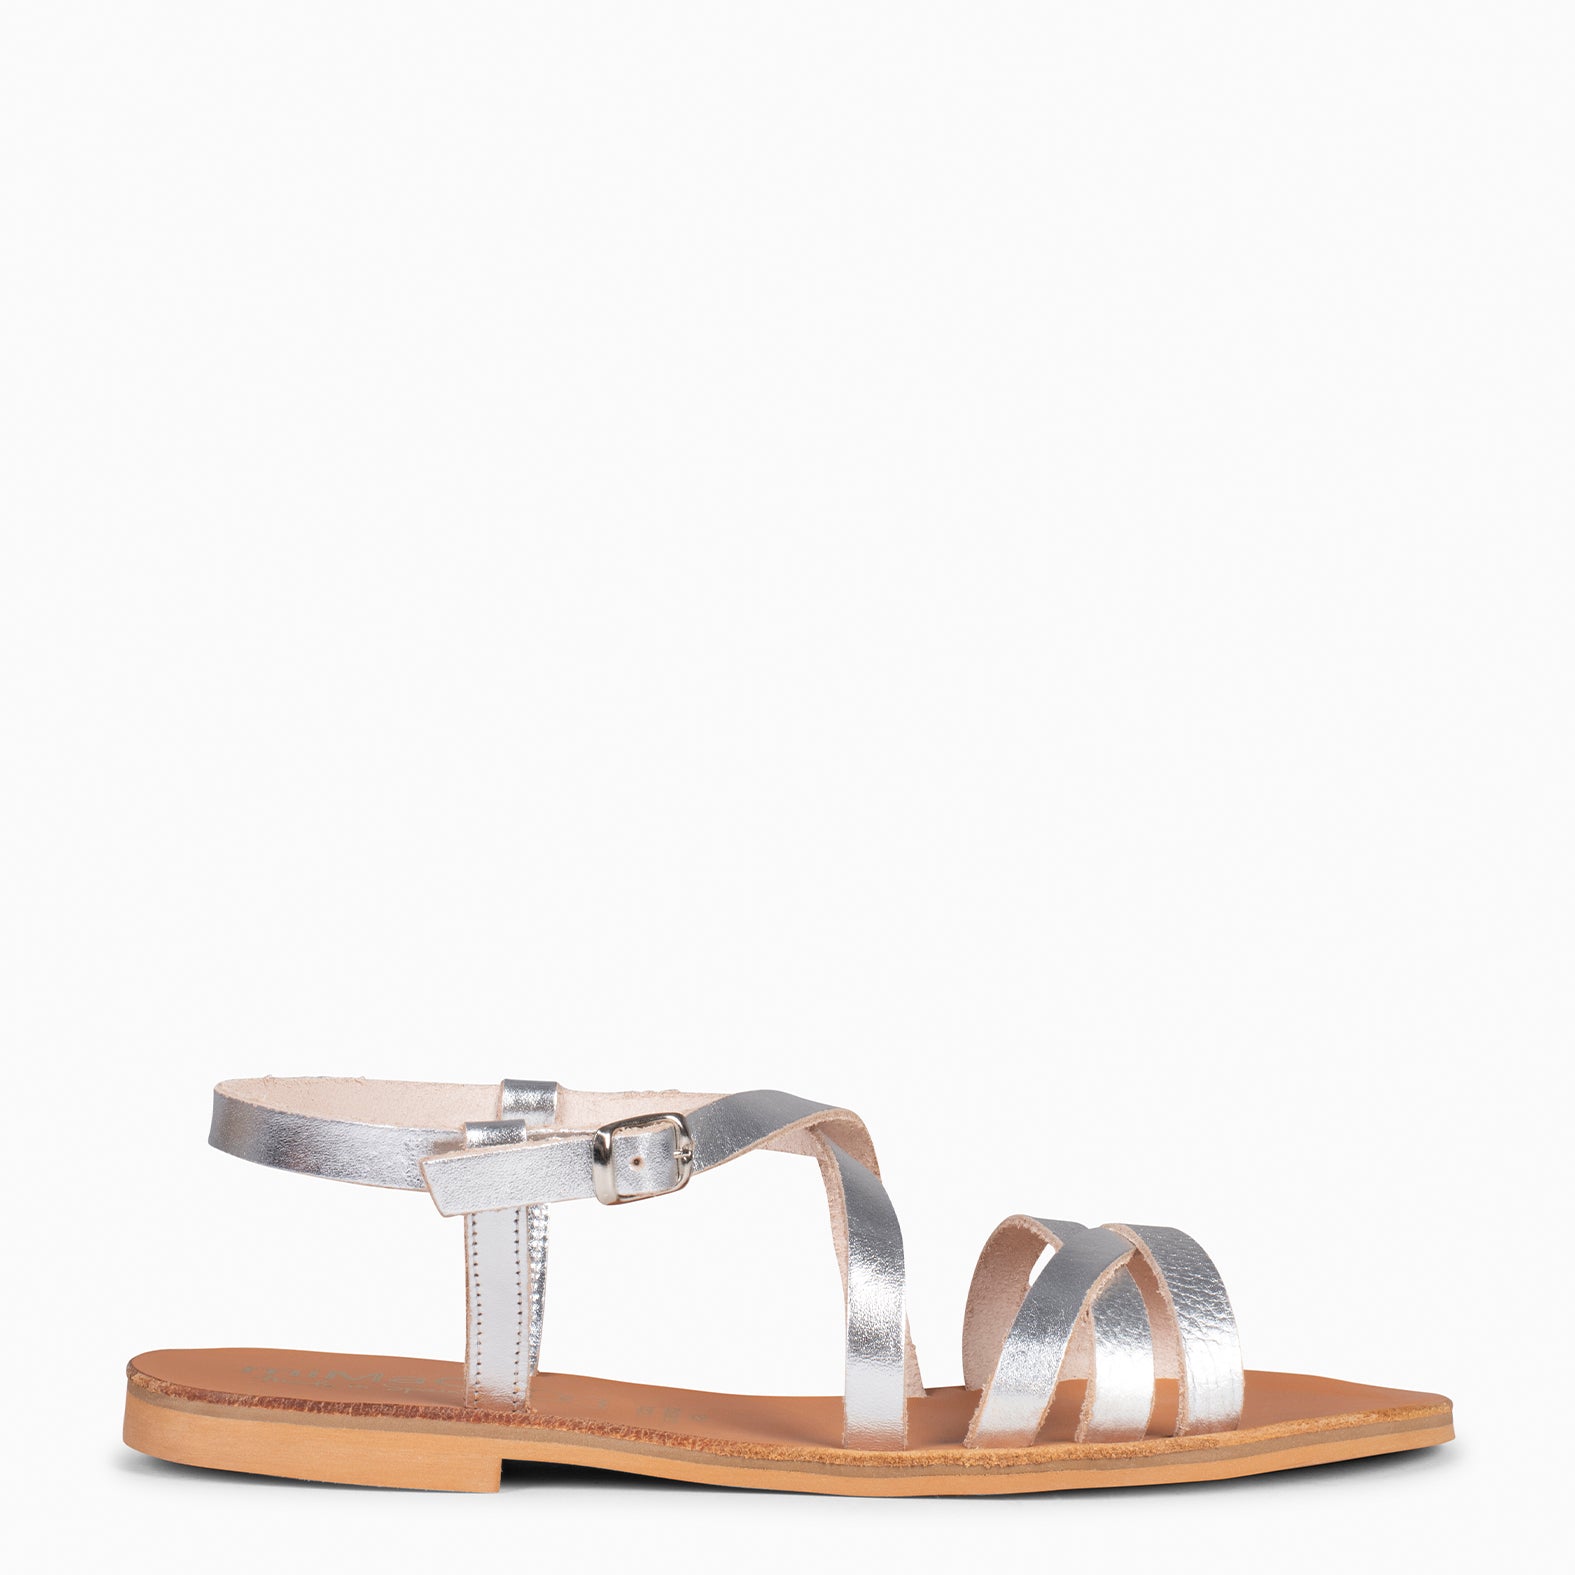 IXORA – SILVER flat sandals with buckle